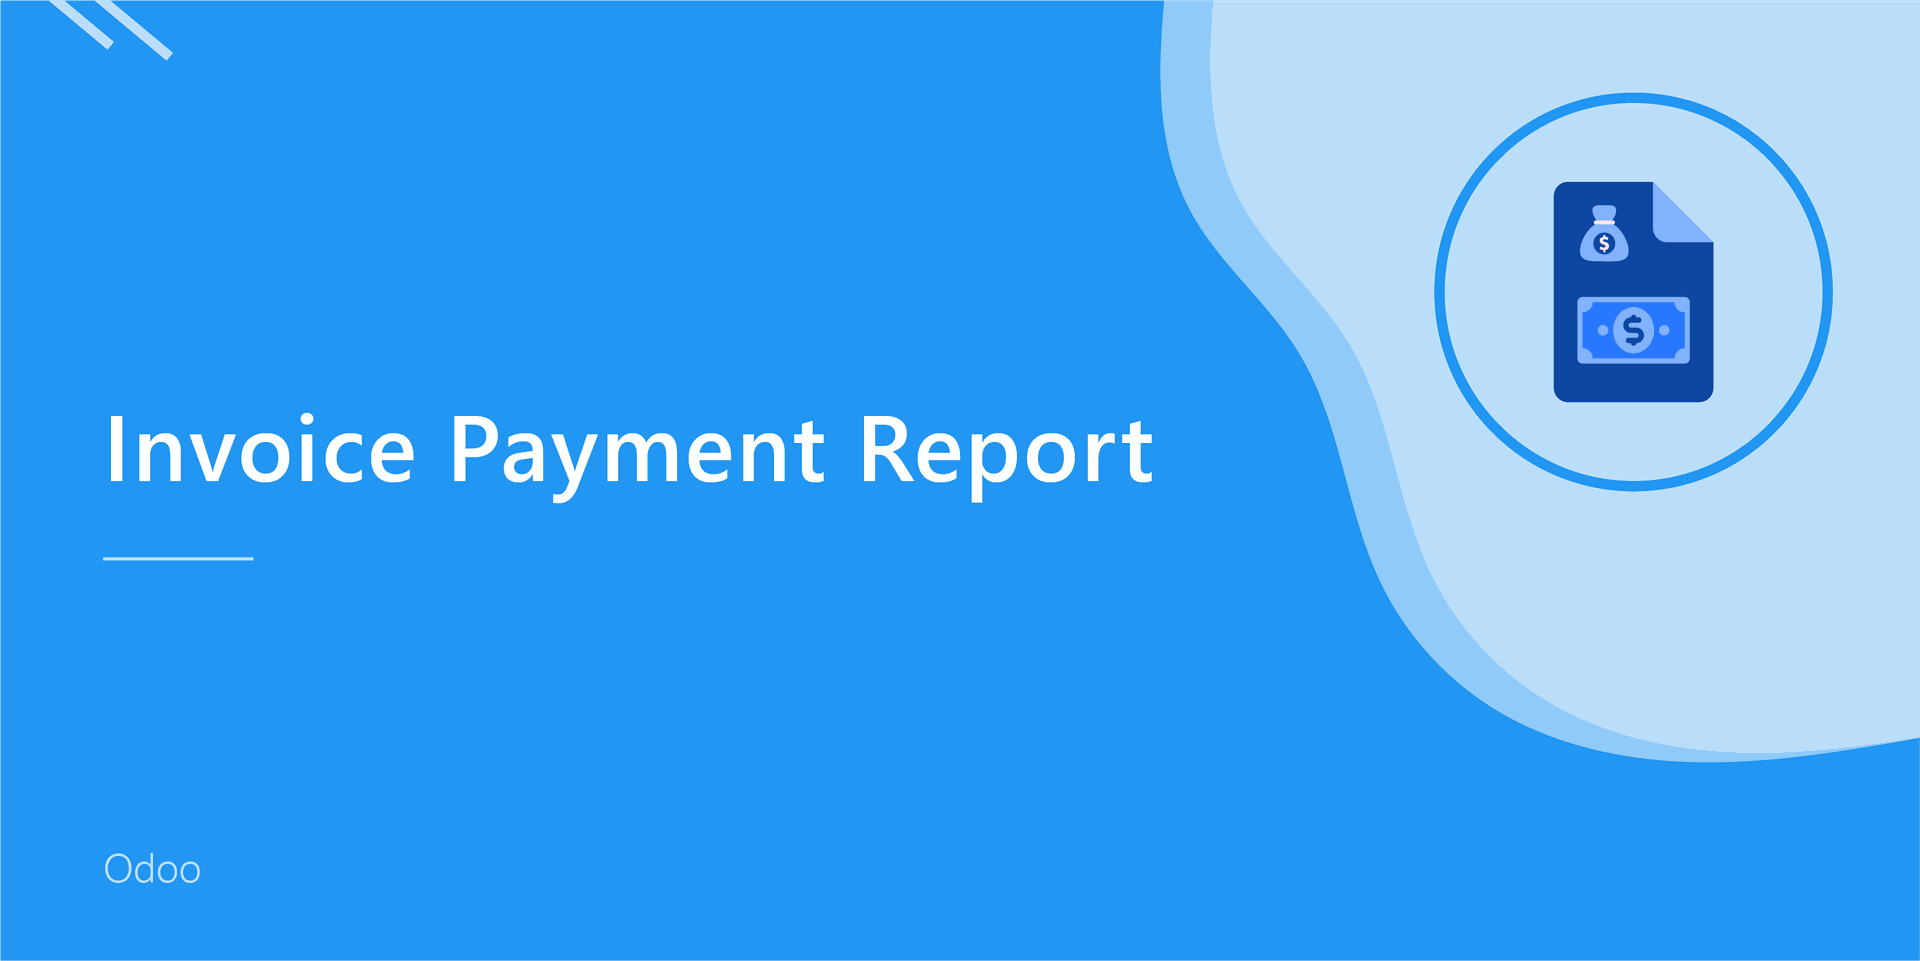 Invoice Payment Report